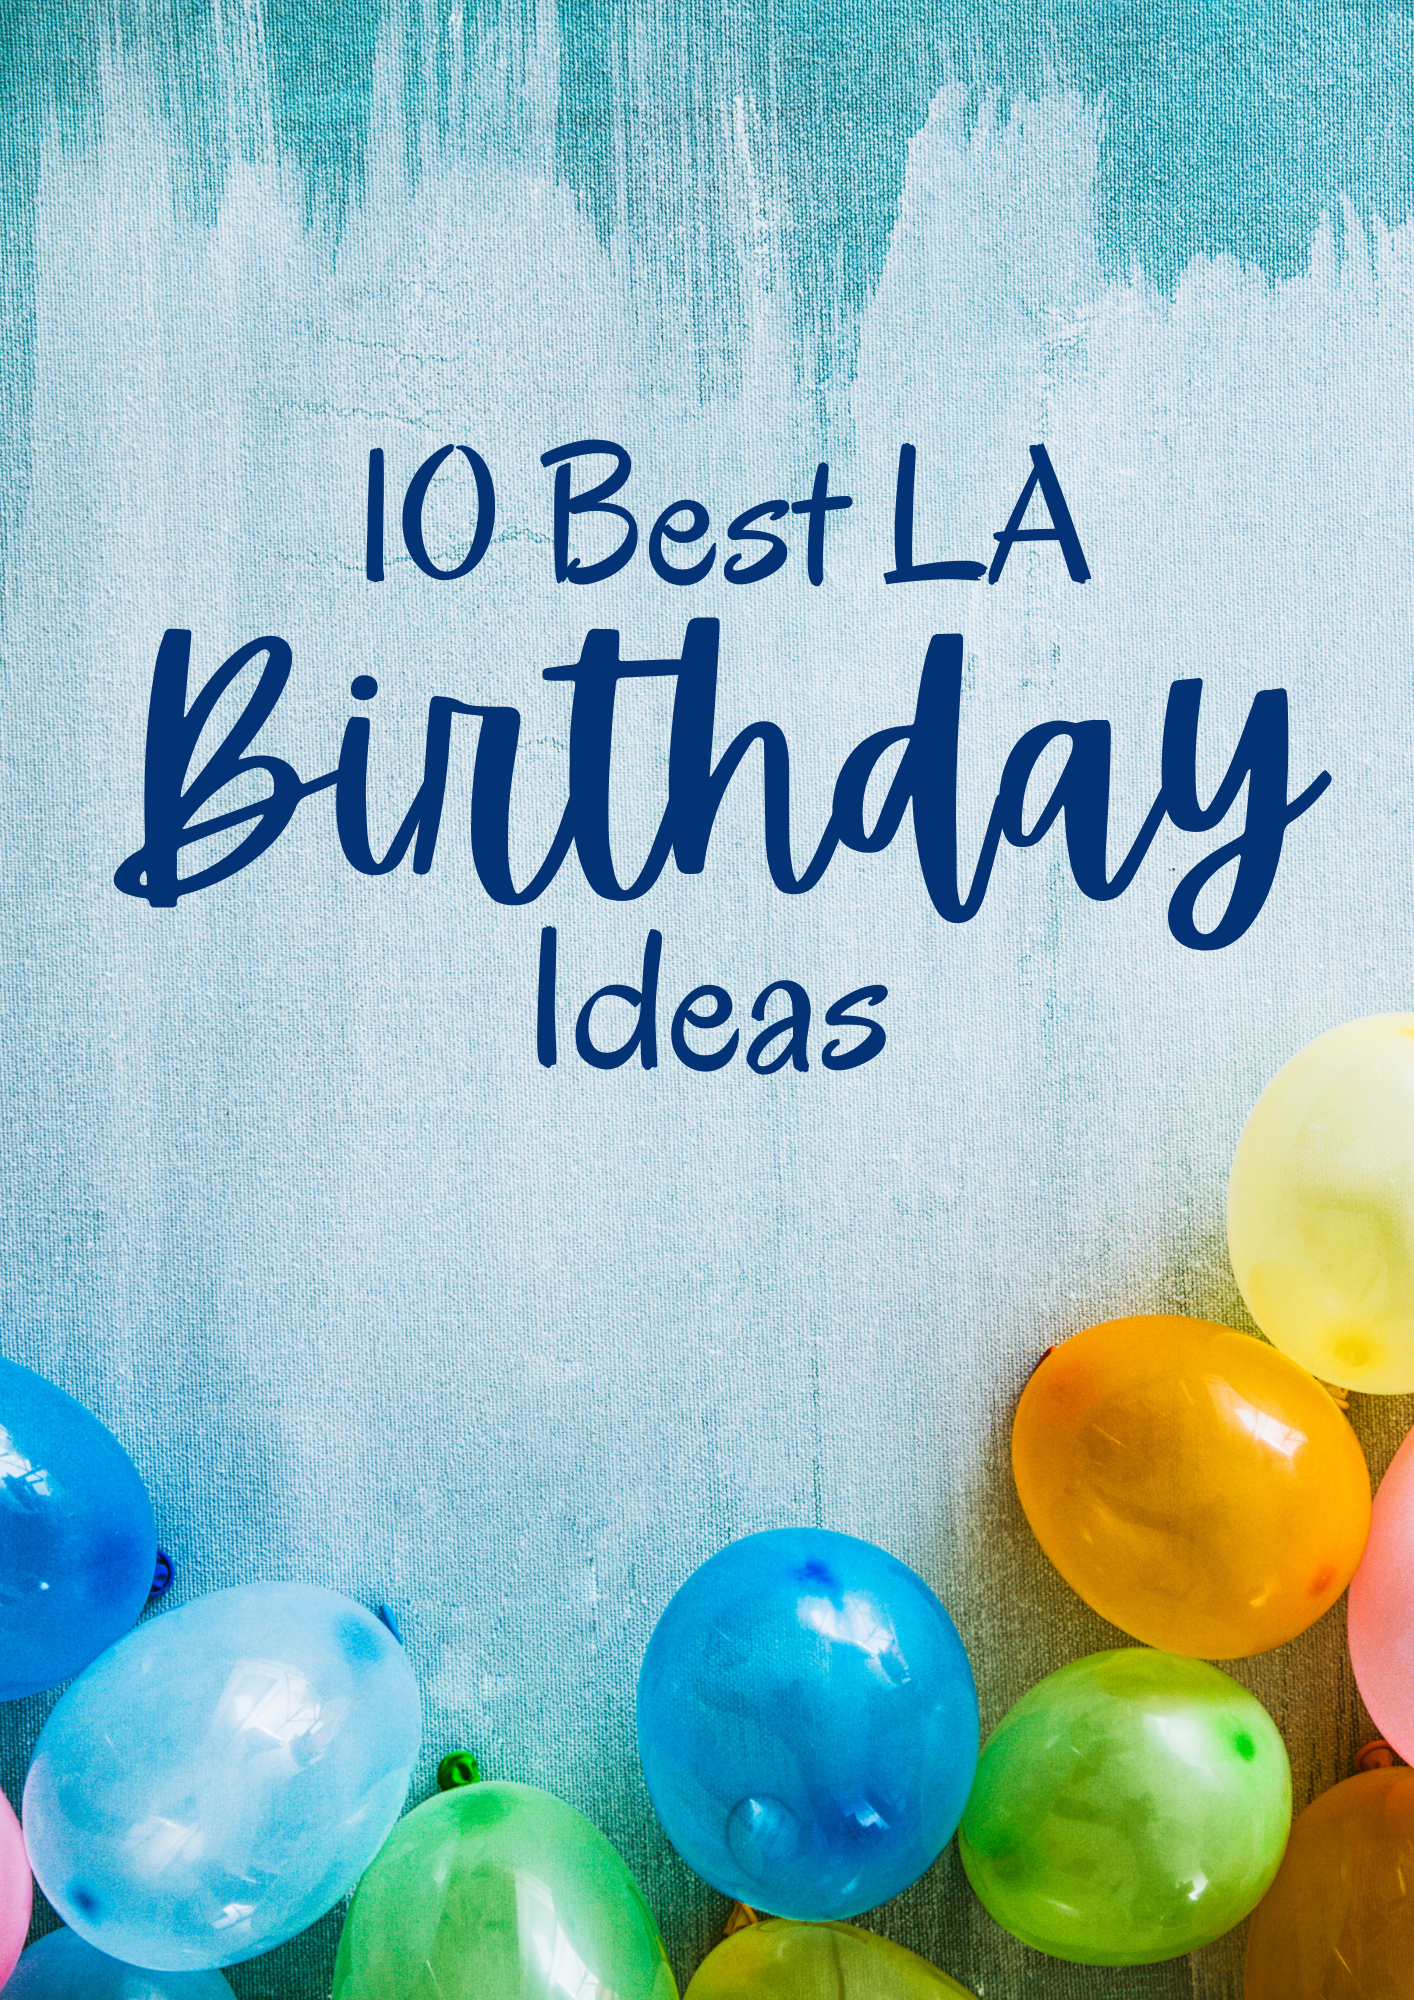 The best birthday limo ideas in Los Angeles.